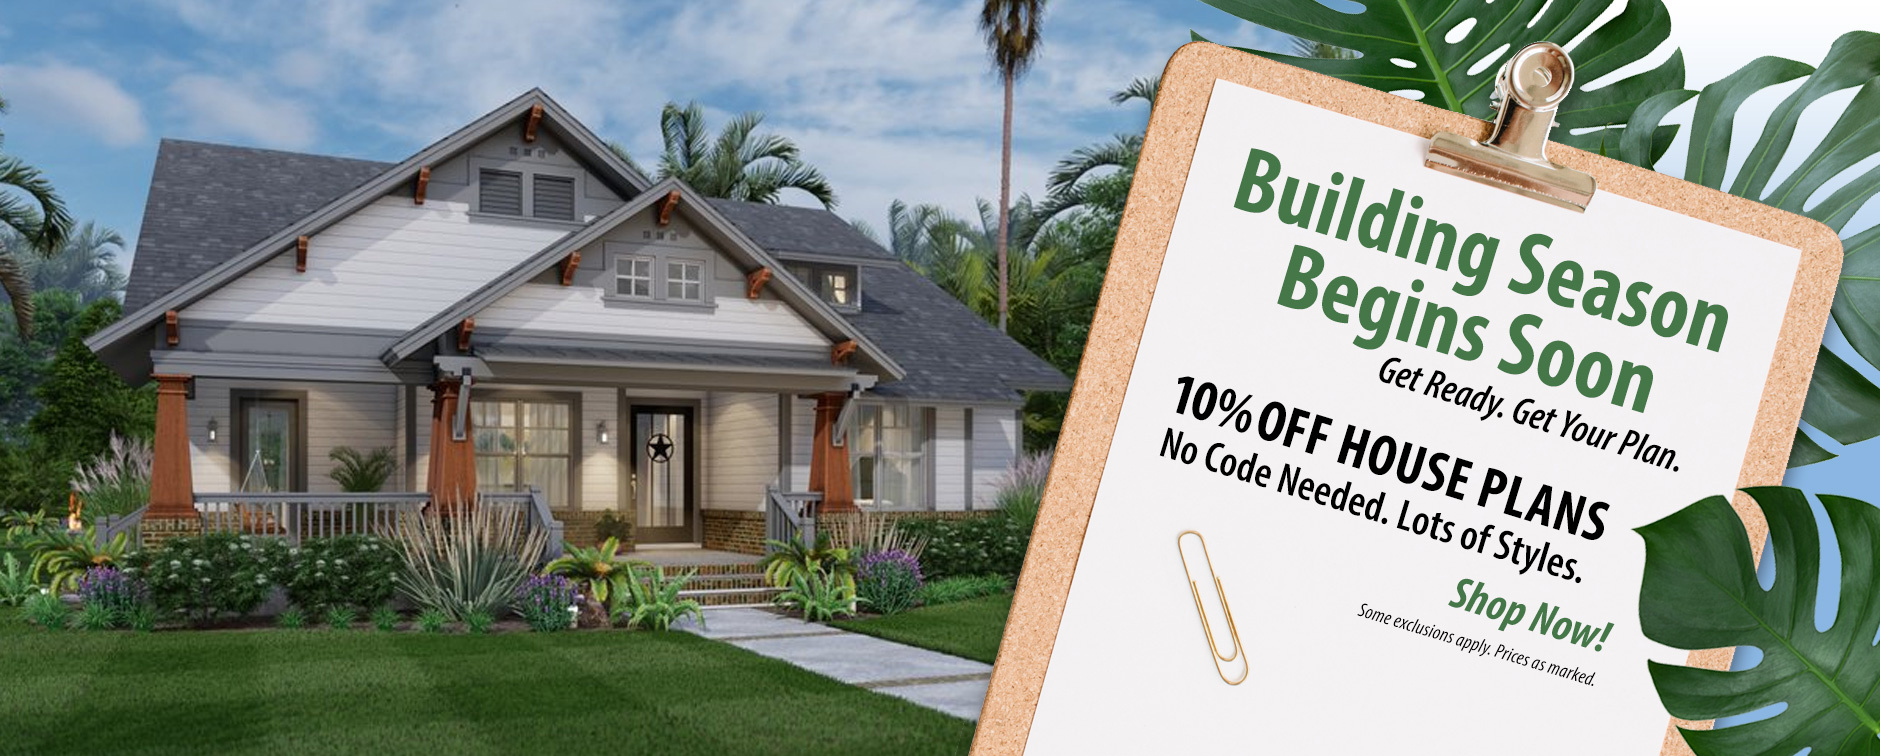 Save 10% on Home Plans - No Code Needed